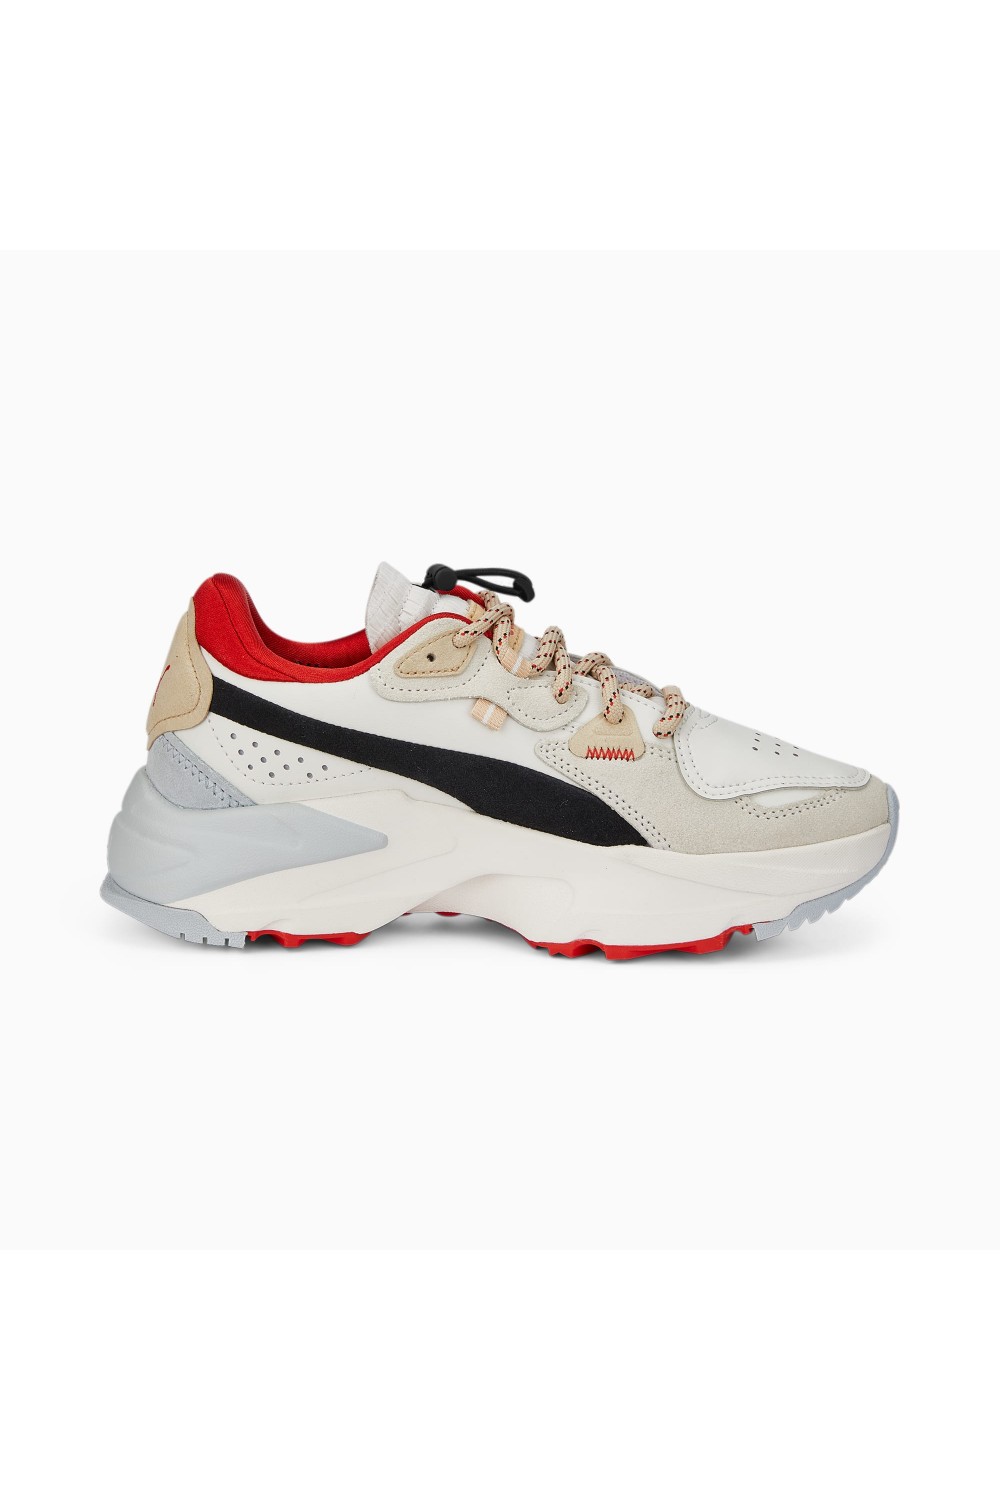 PUMA SNEAKERS ORKID RETRO GRADE WNS VAPOROUS GRAY-BURNT RED 387465-01